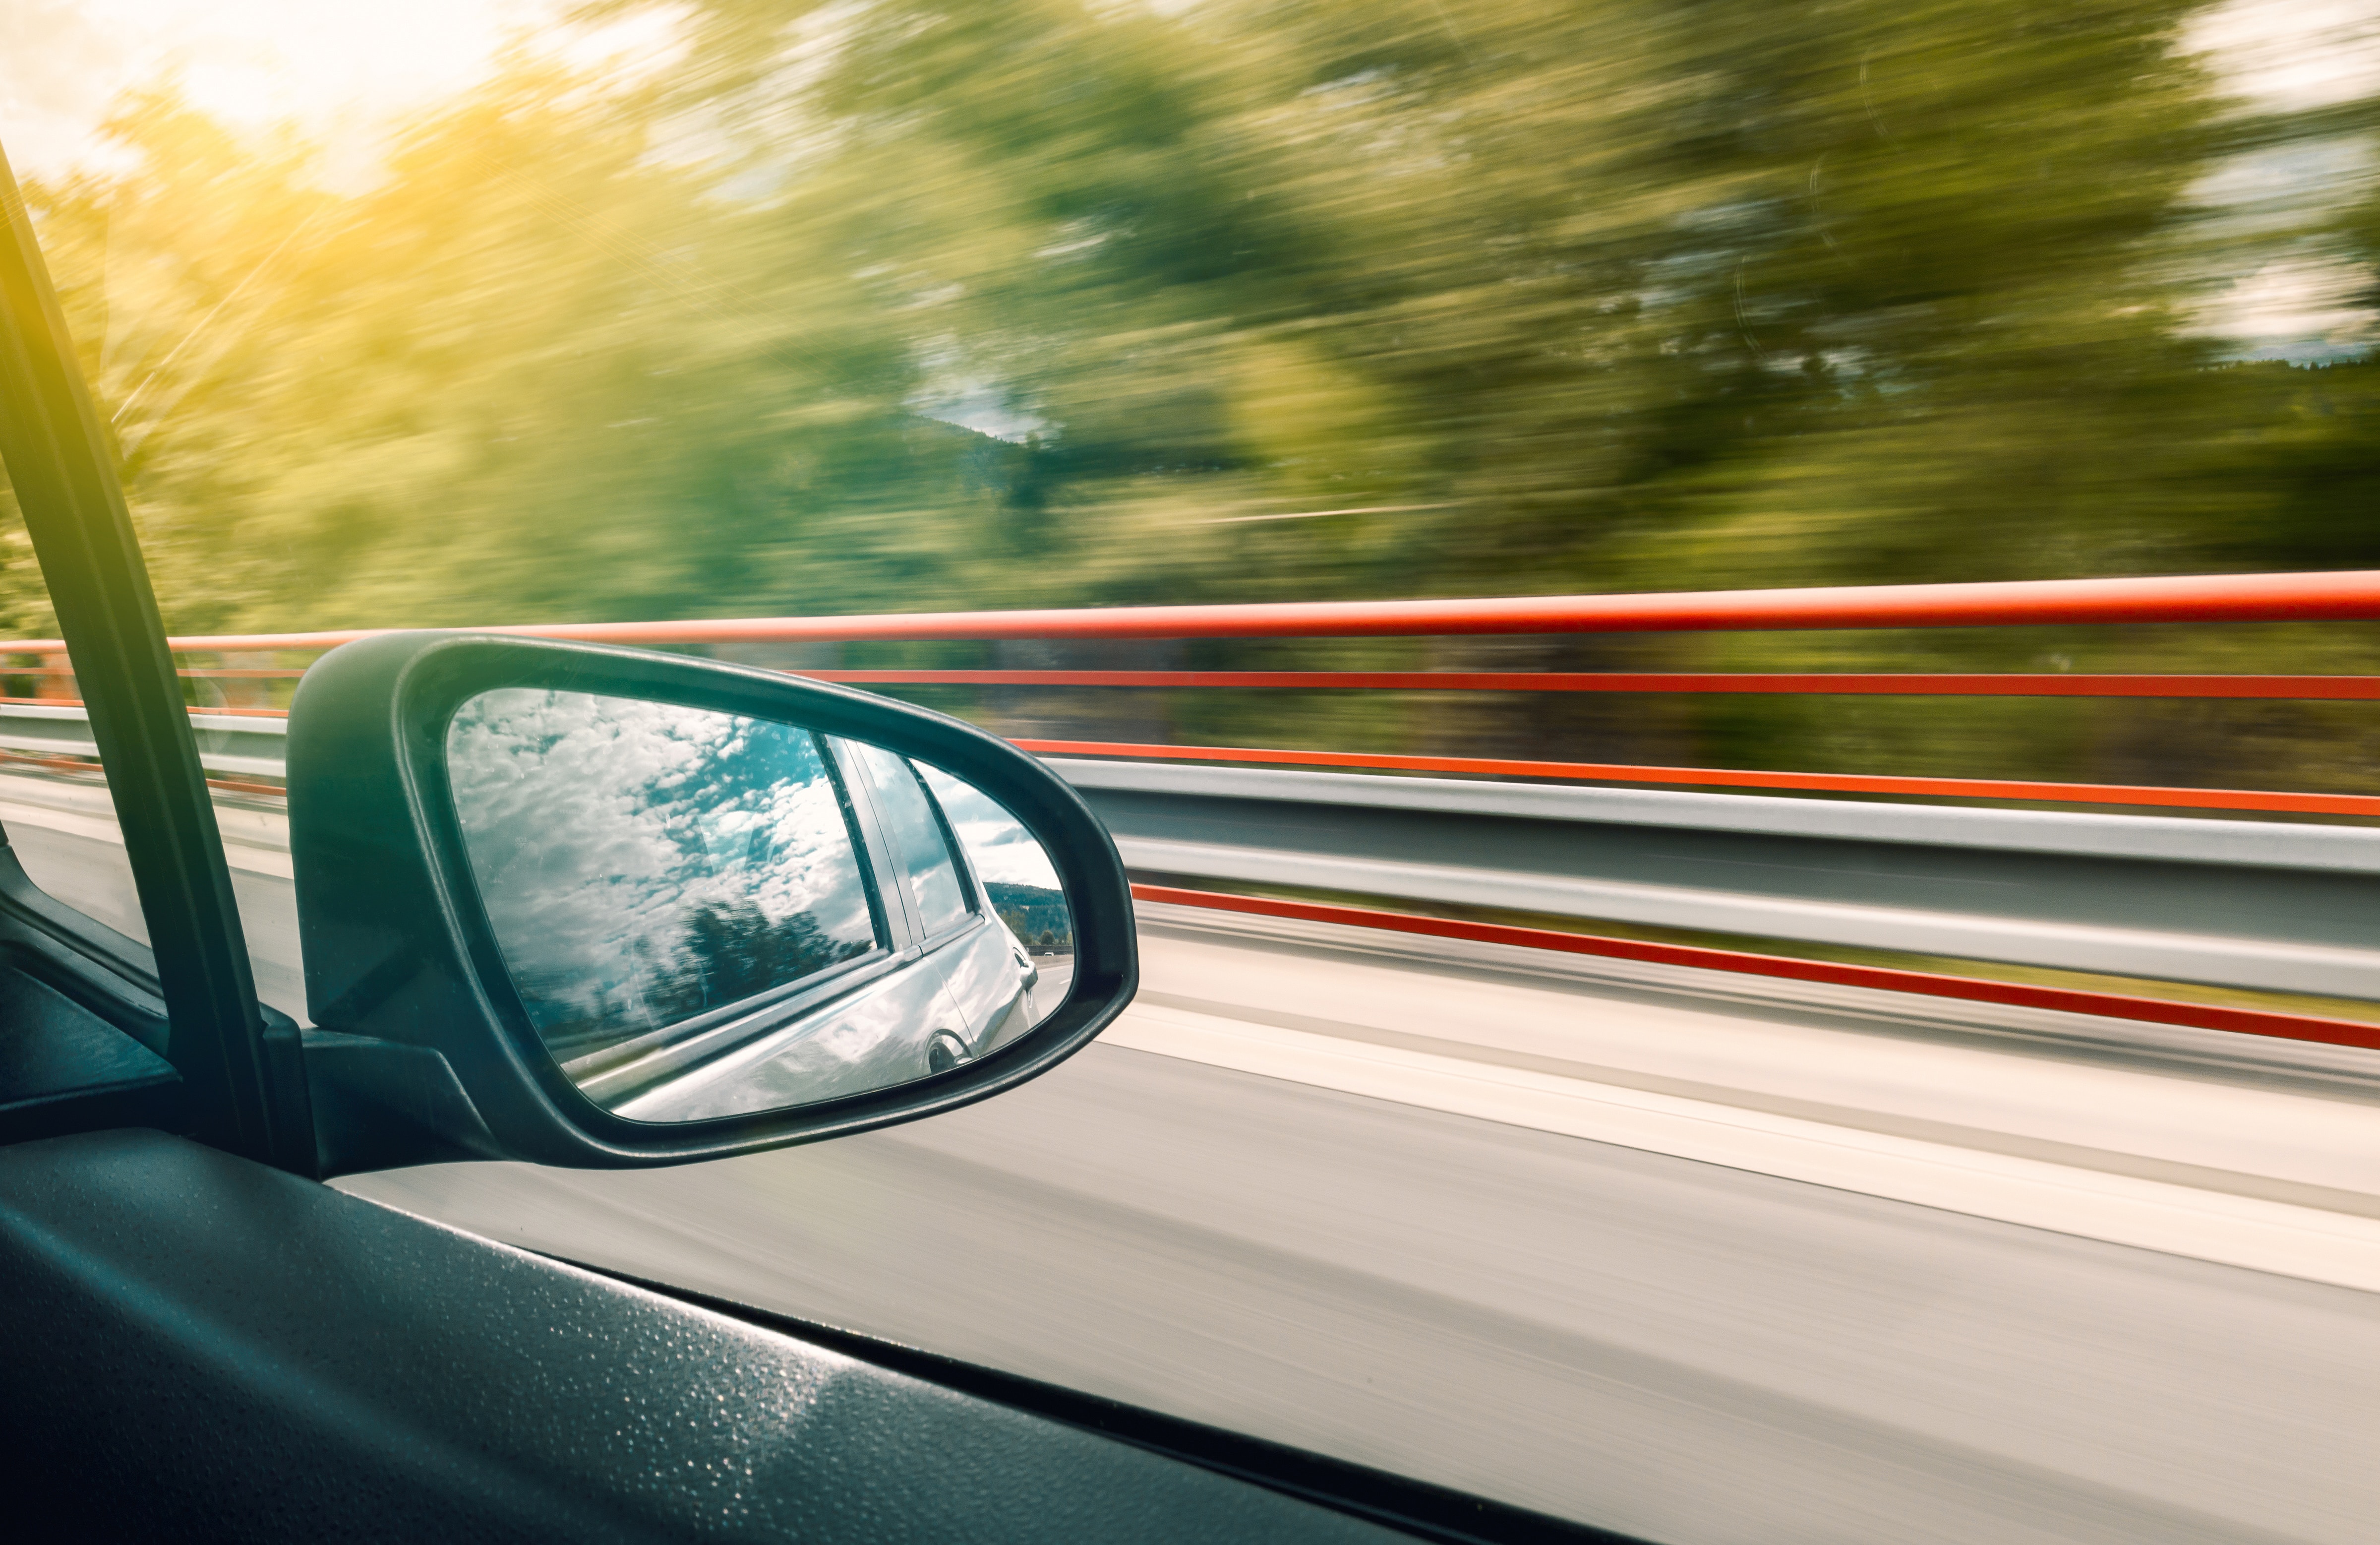 Photo of a car side-view mirror on motorway